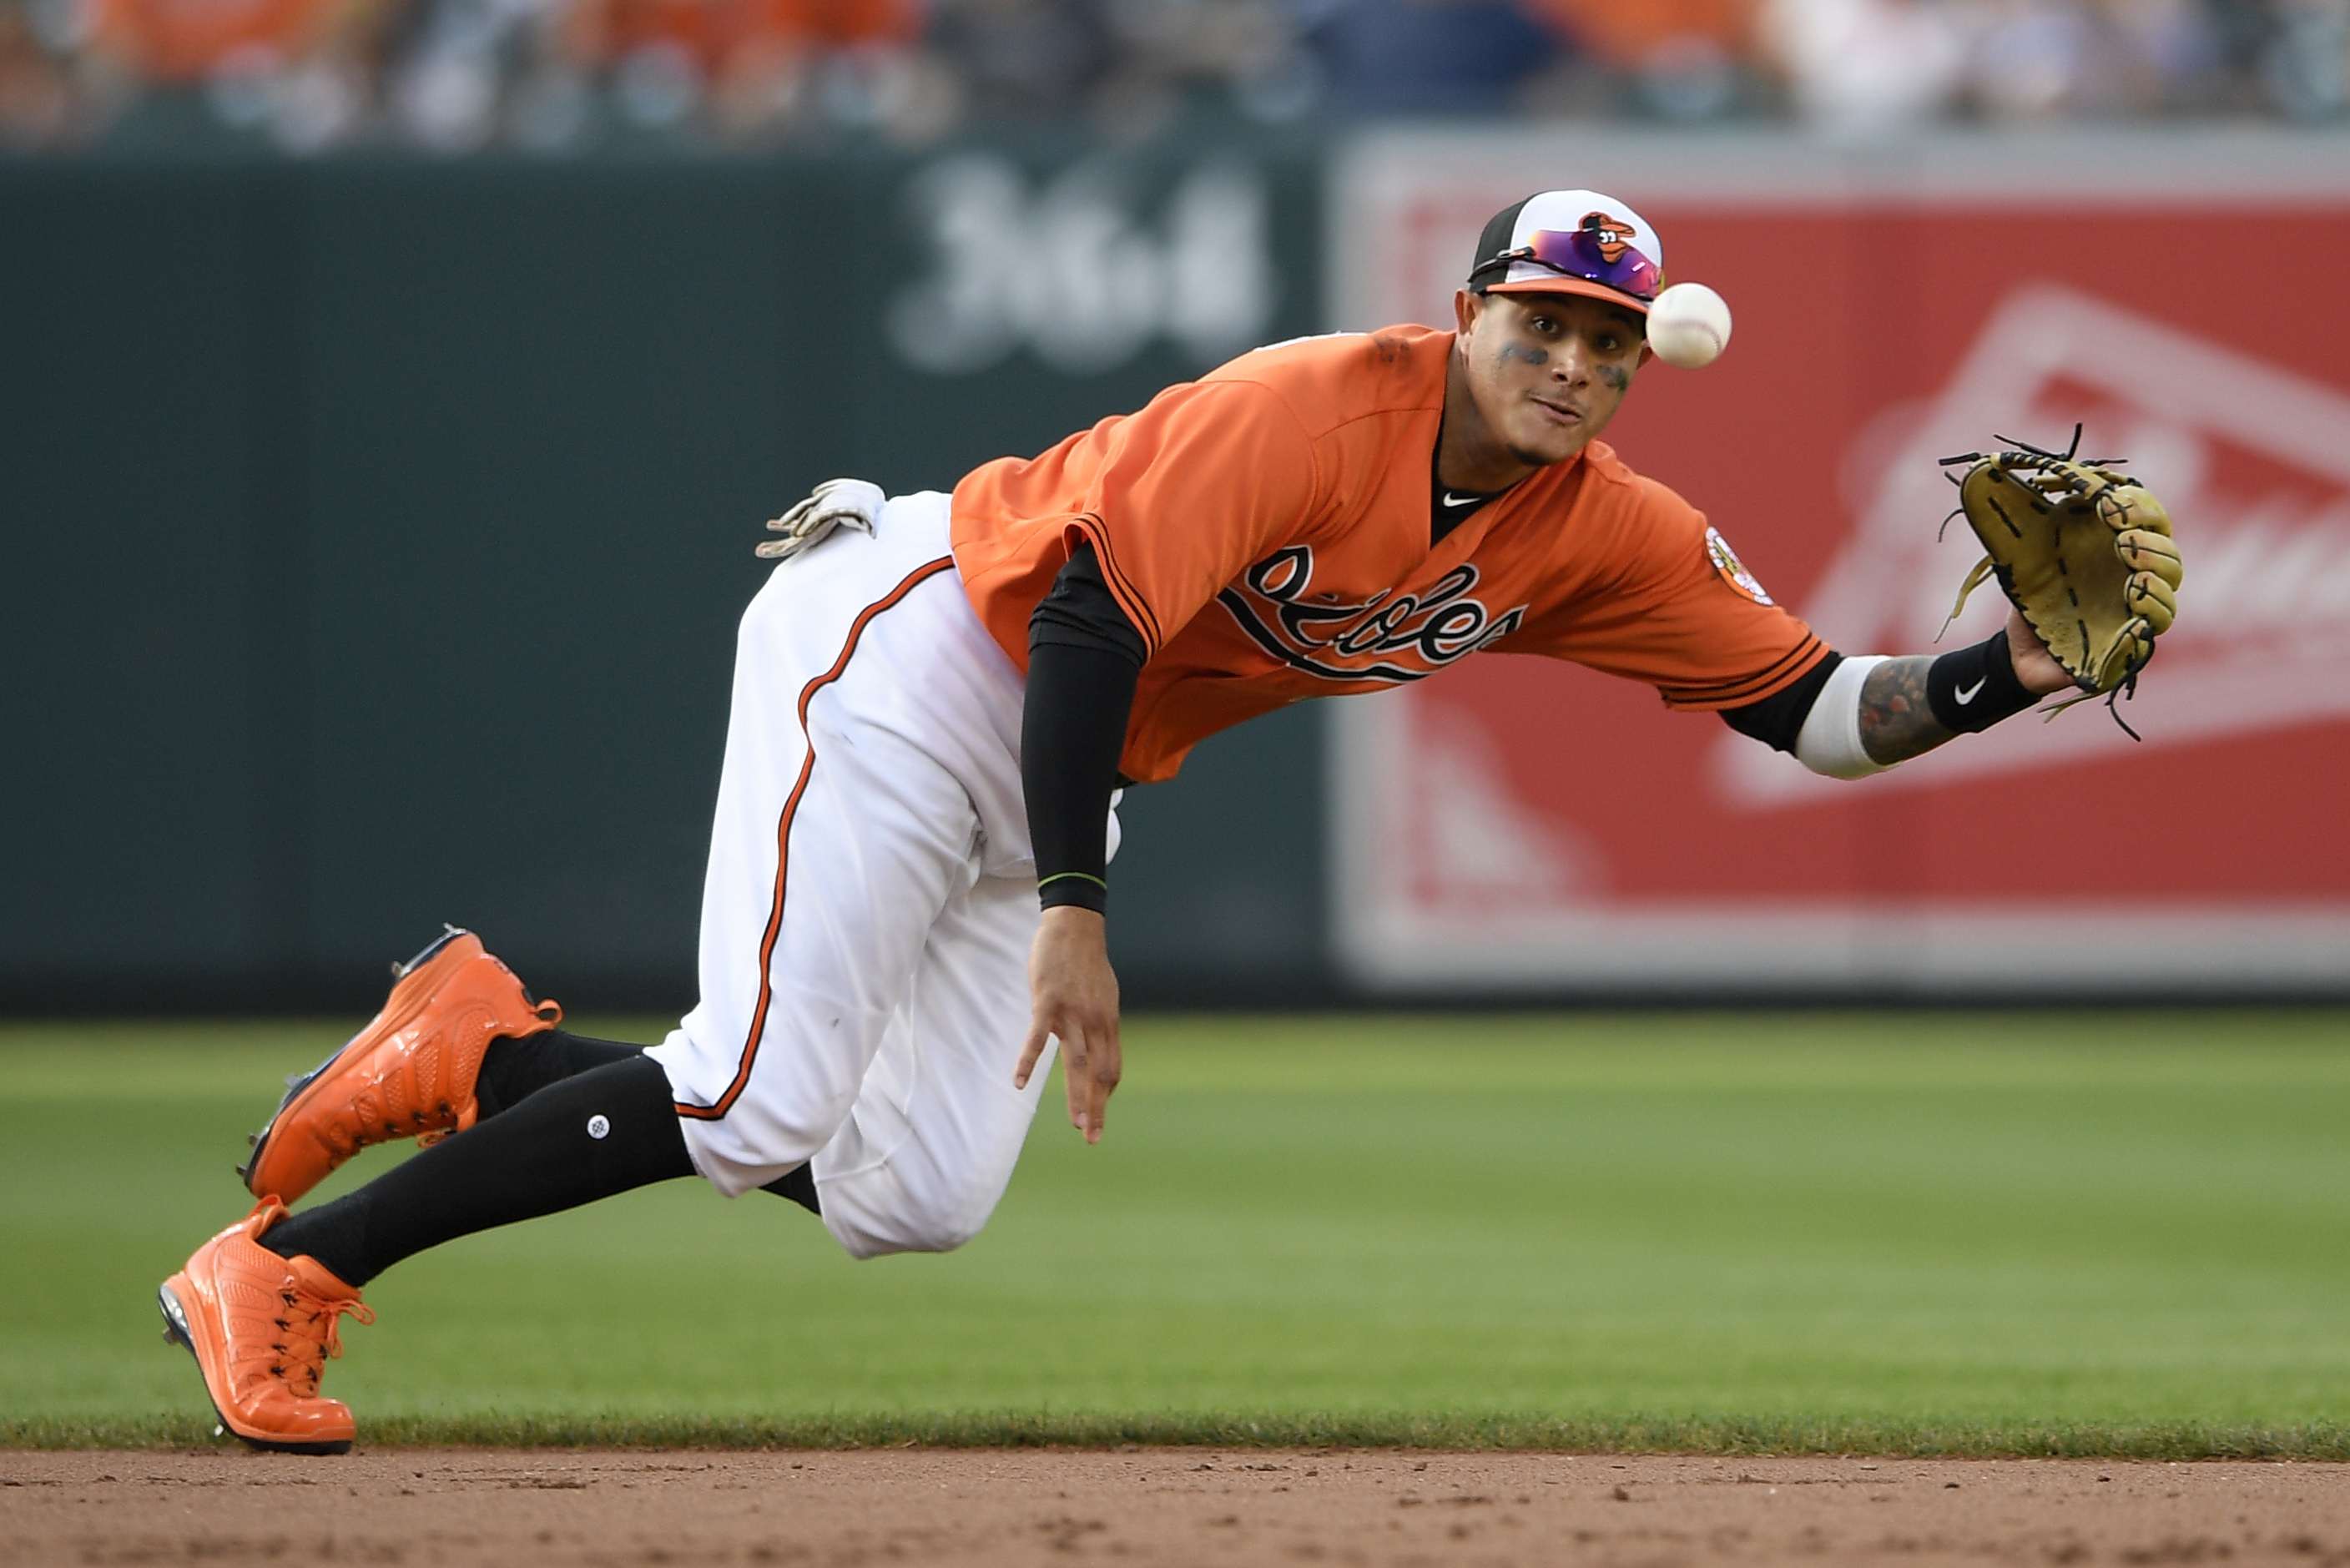 Trade talk is heating up for Orioles' Manny Machado - The Boston Globe